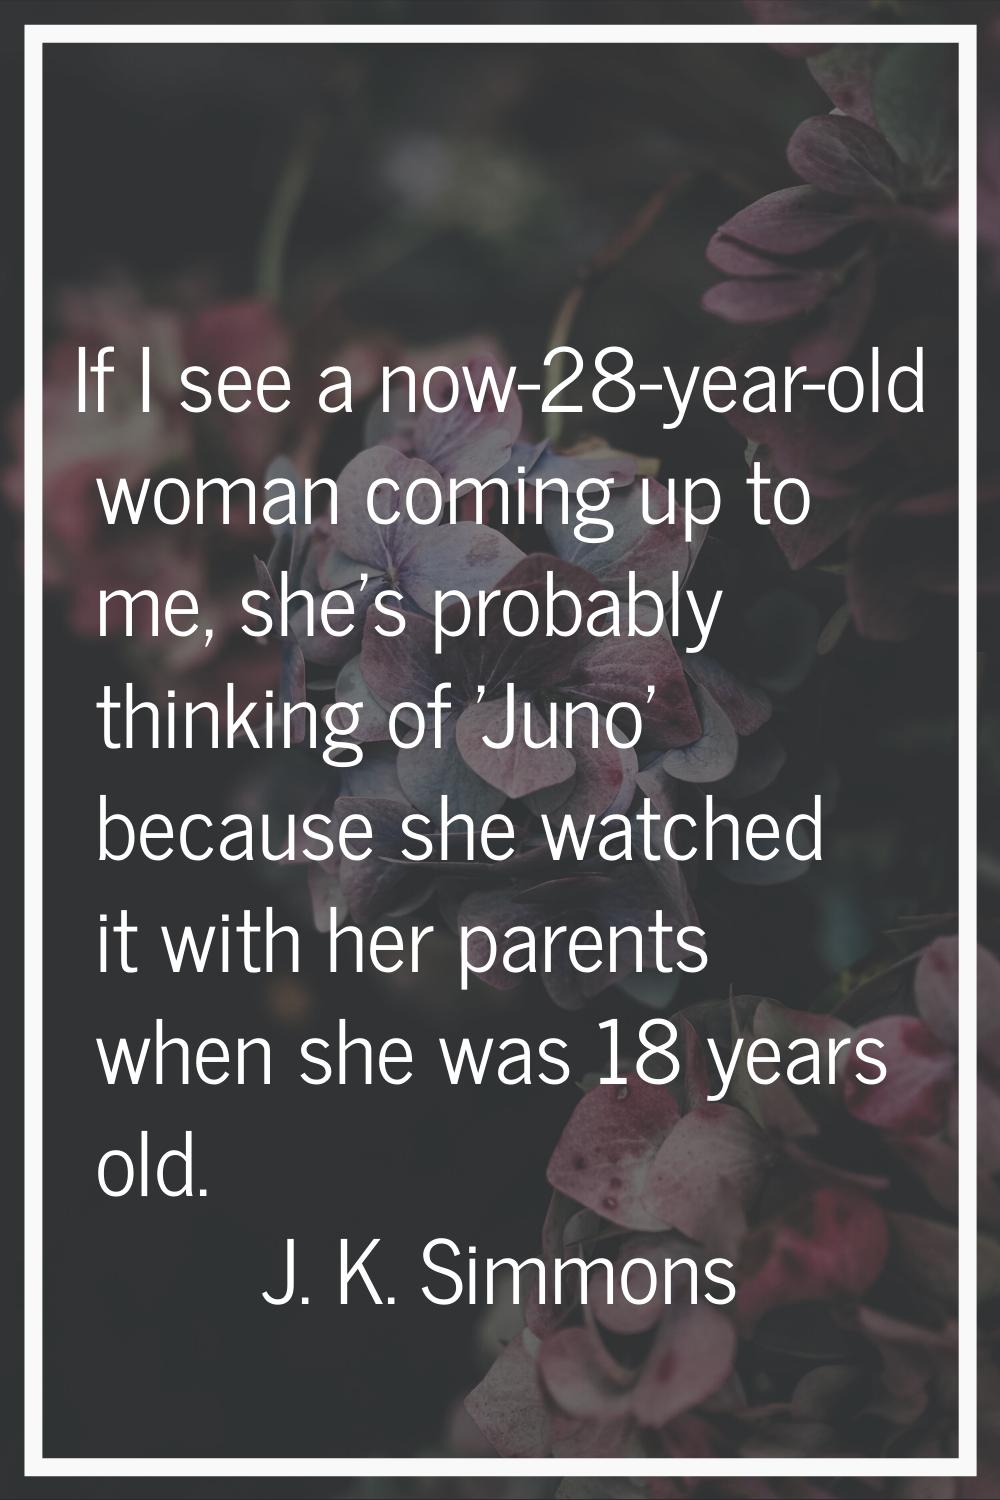 If I see a now-28-year-old woman coming up to me, she's probably thinking of 'Juno' because she wat